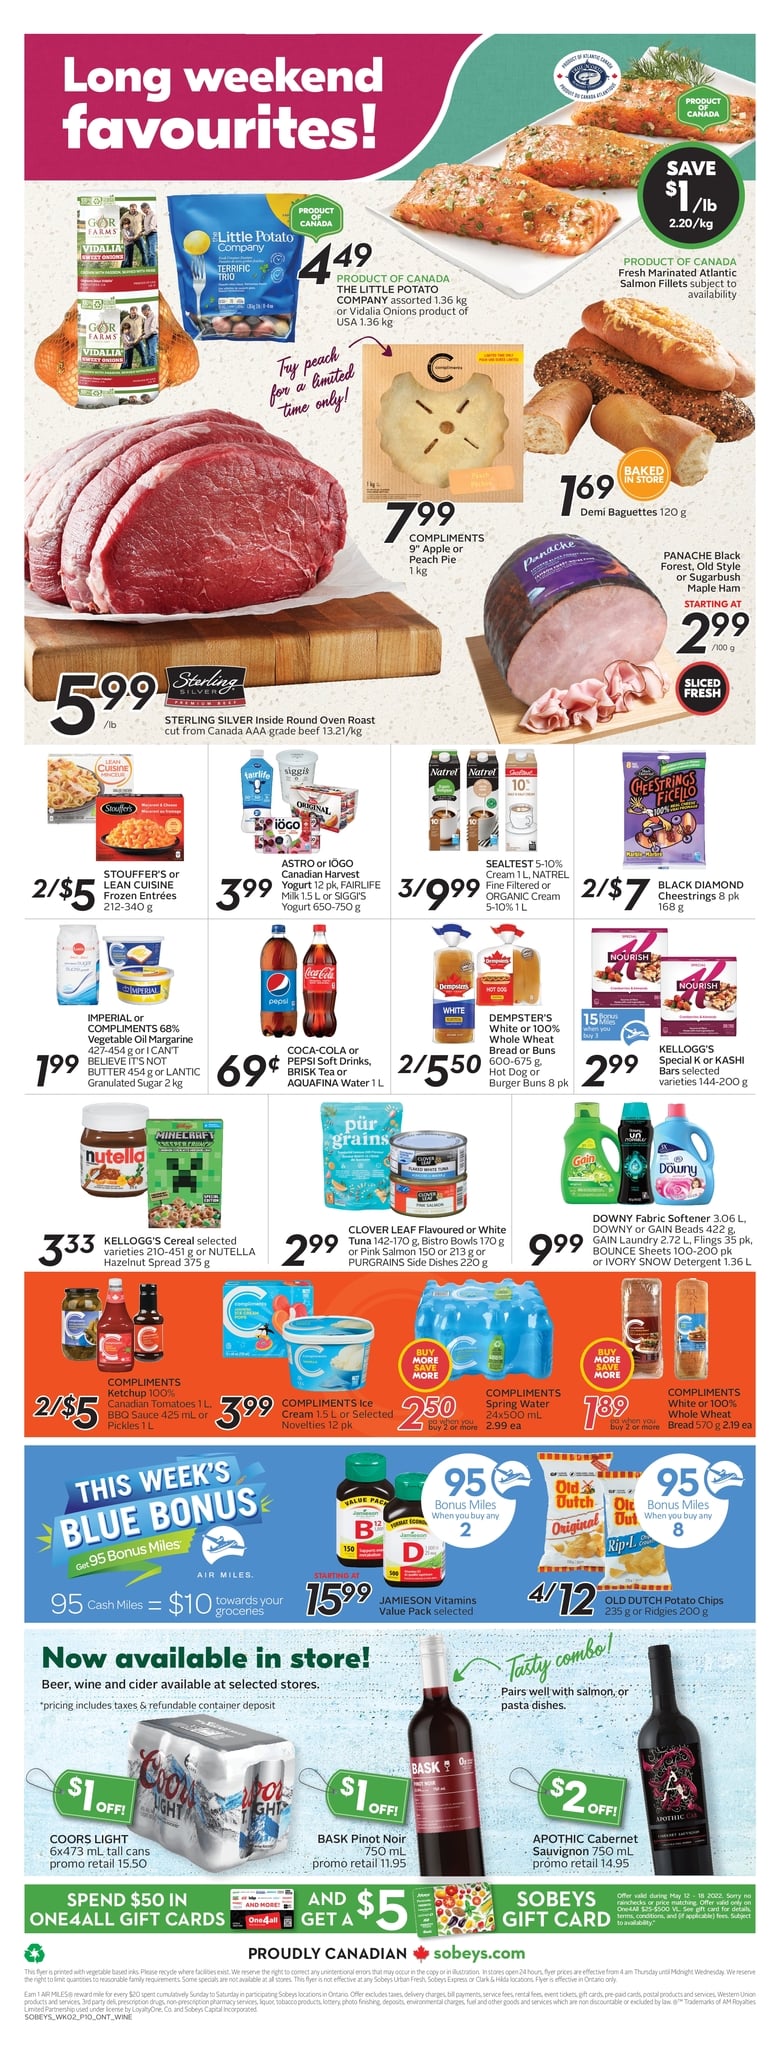 Sobeys - Weekly Flyer Specials - Page 3